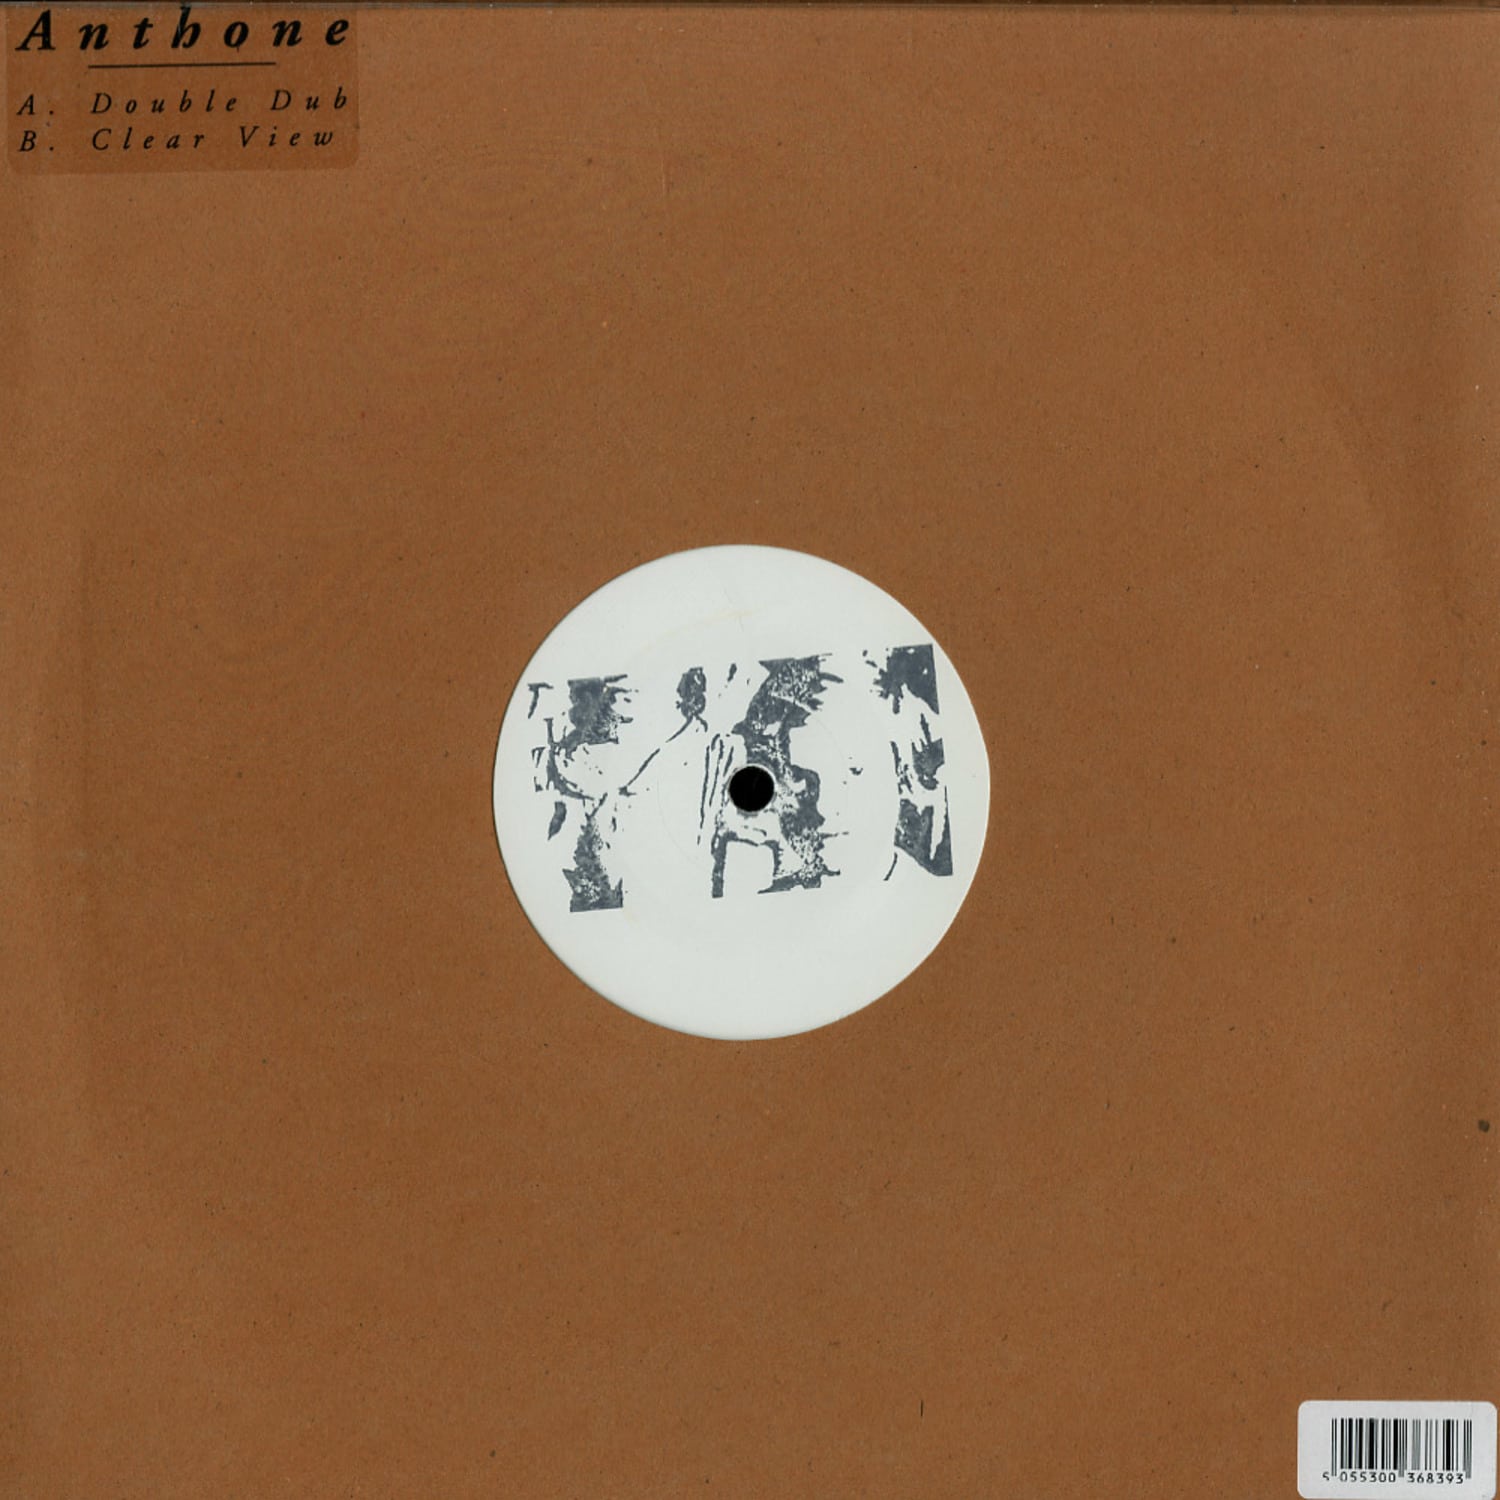 Anthone - DOUBLE DUB / CLEAR VIEW 